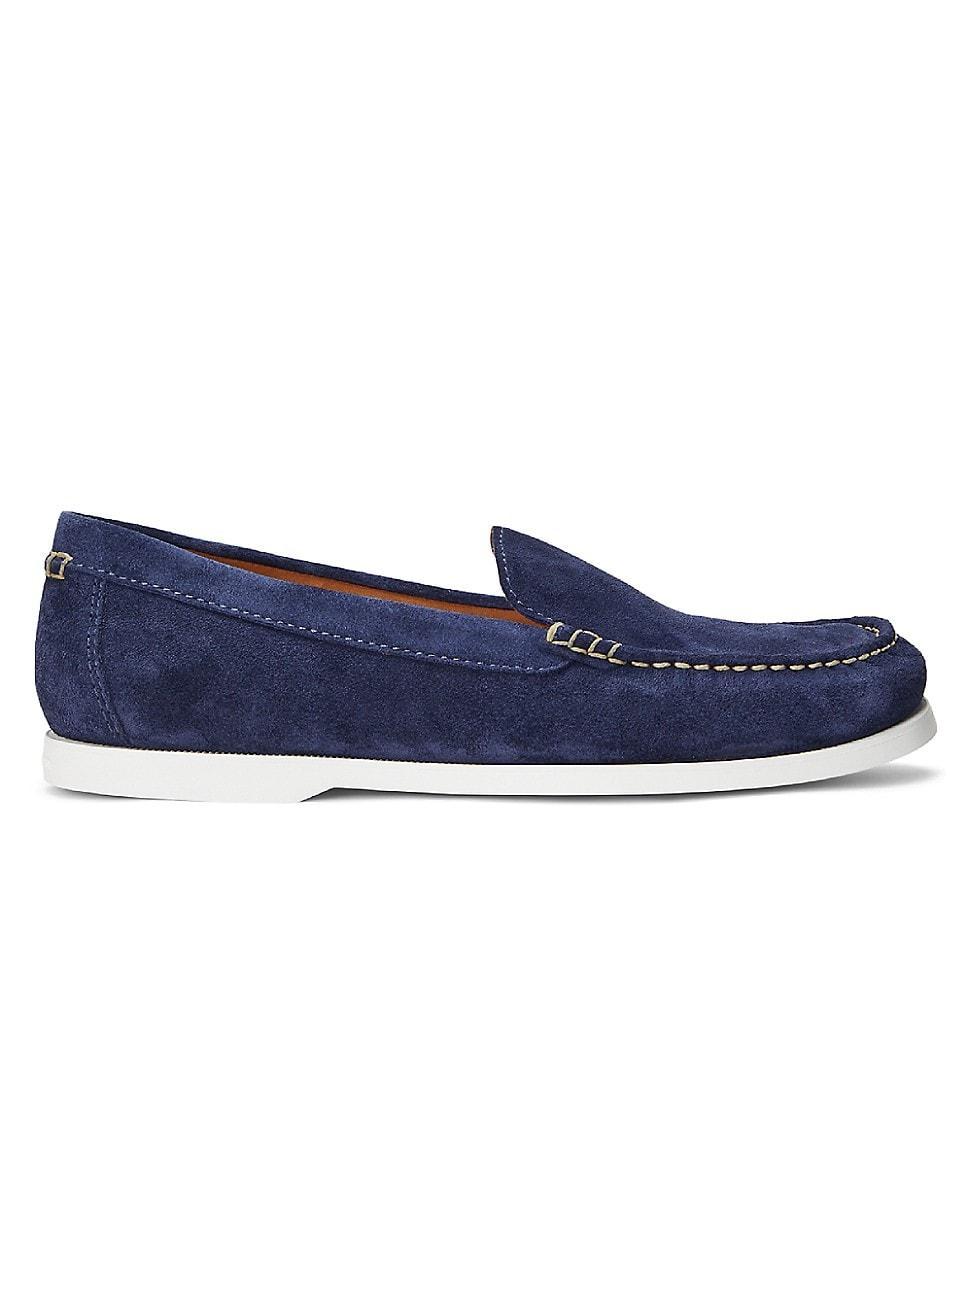 Mens Merton Leather Boat Shoes Product Image